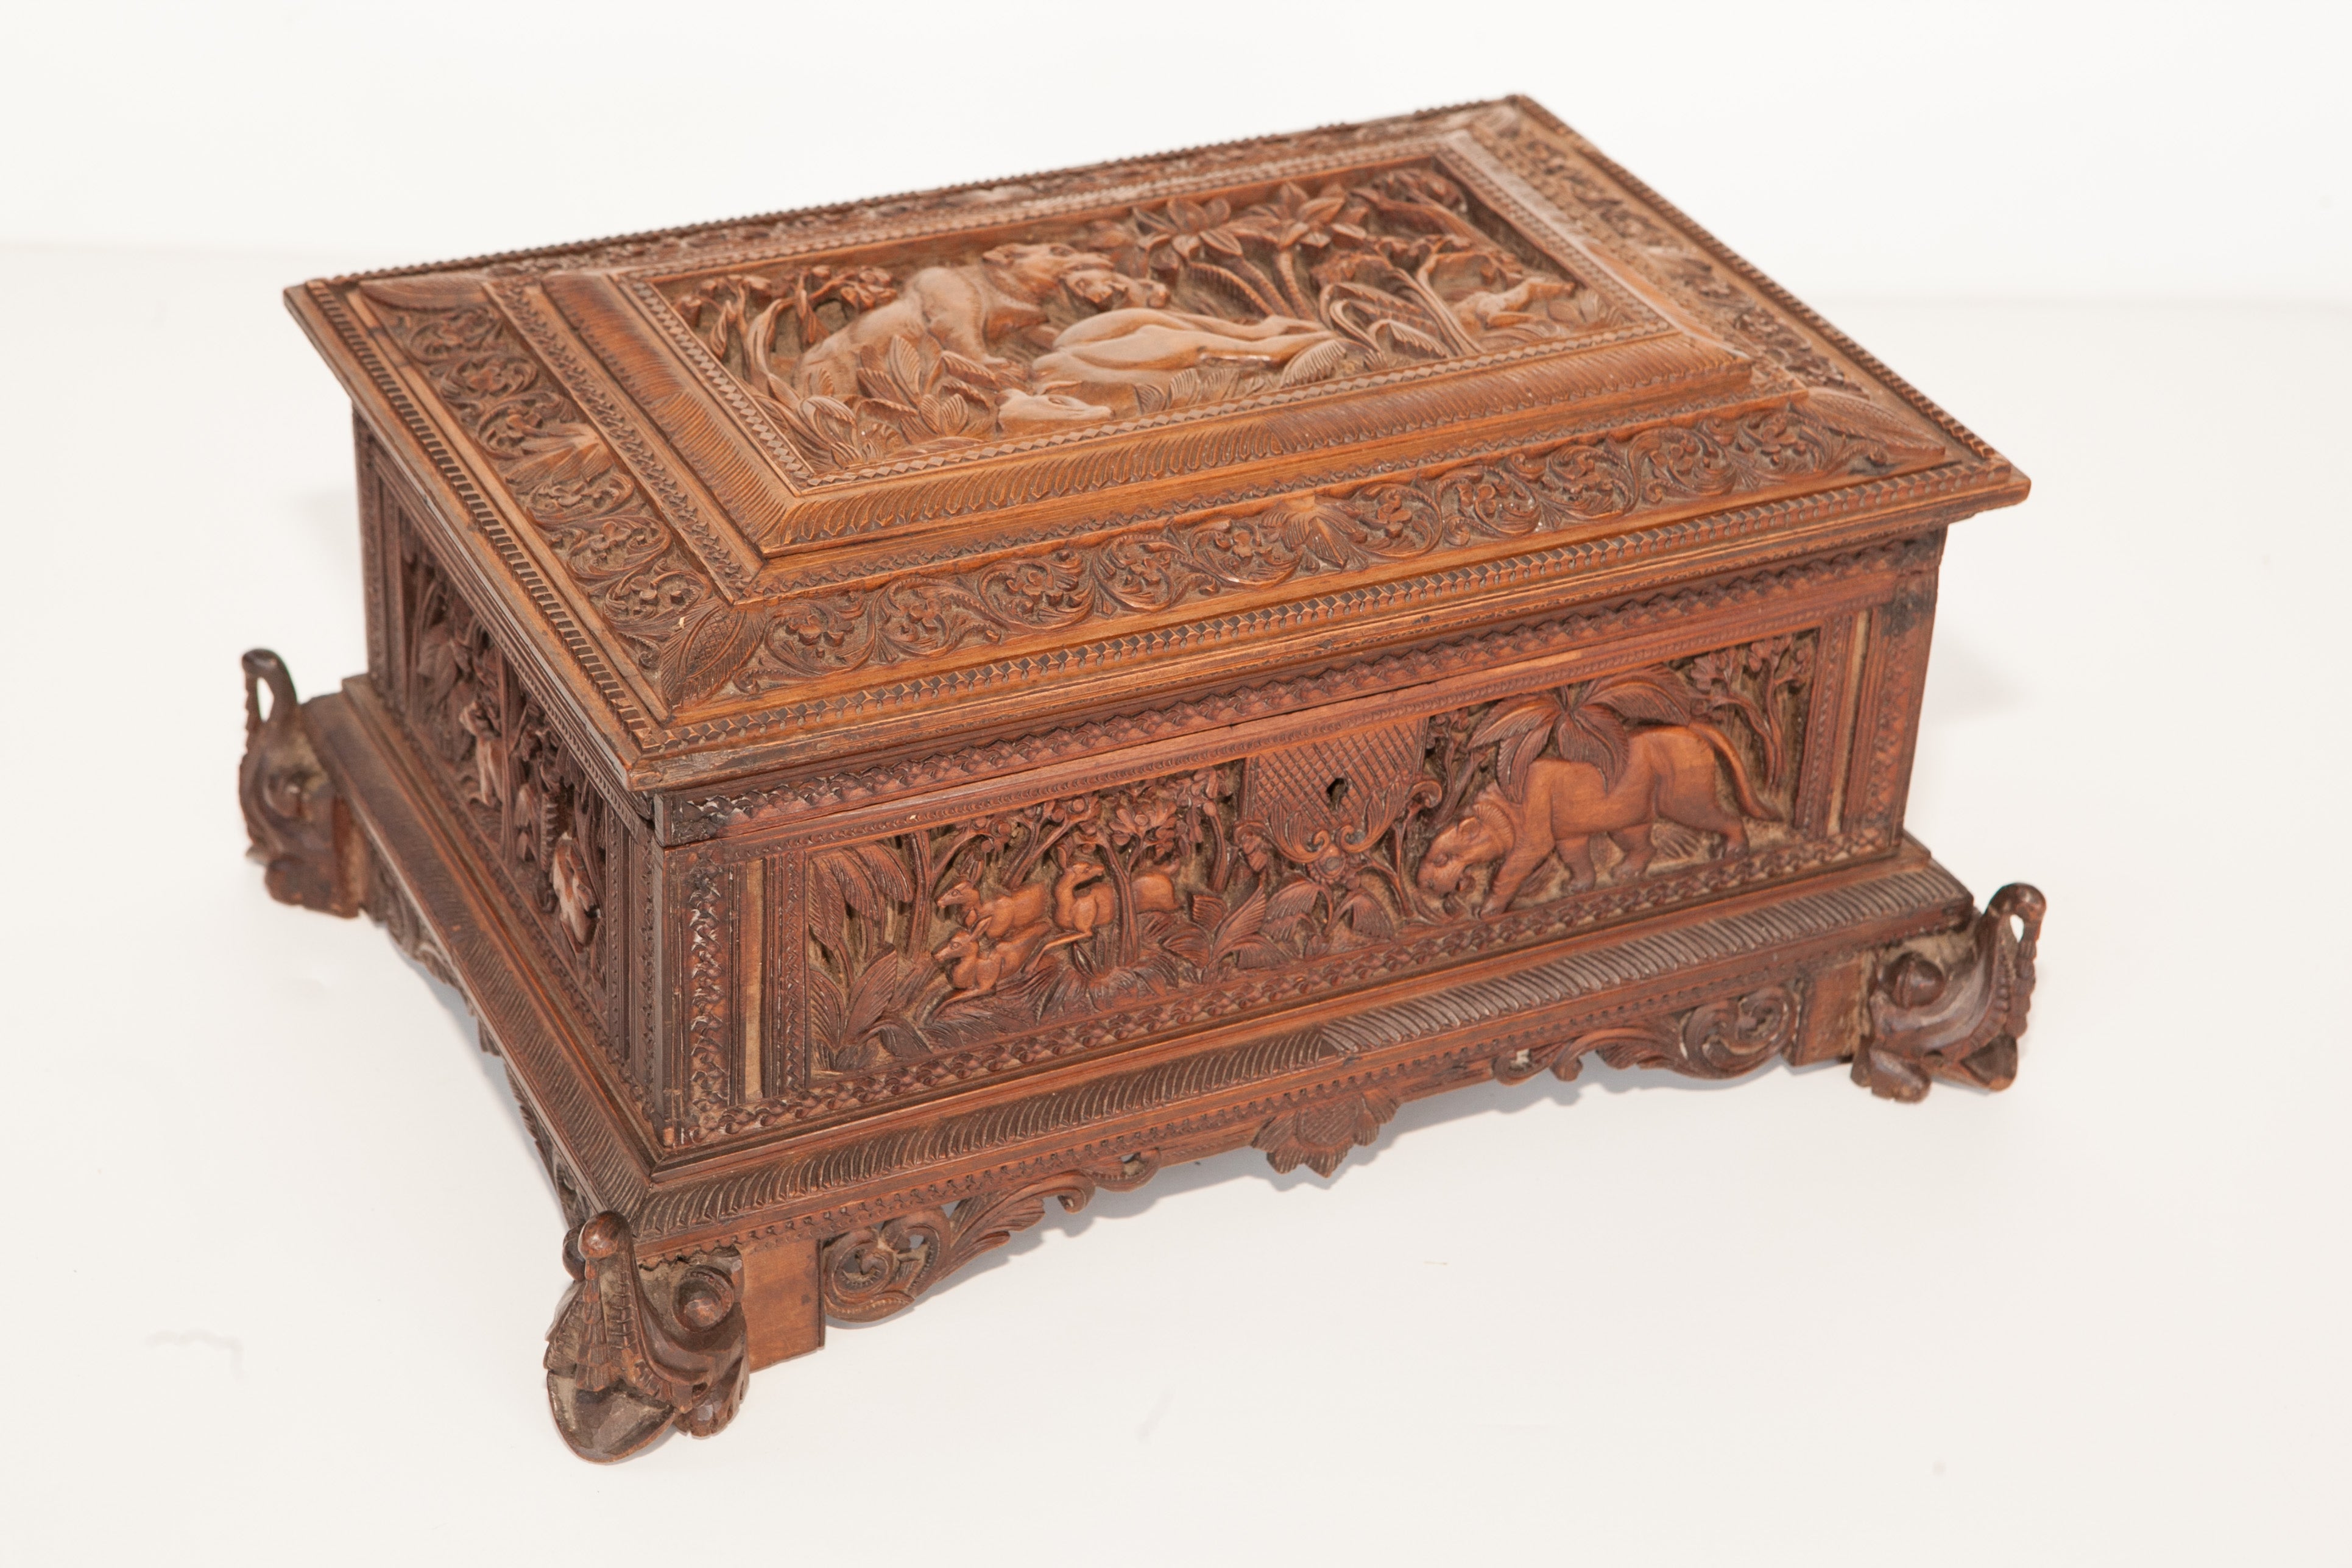 South Indian Sandalwood Jewelry Box with Elaborate Carving